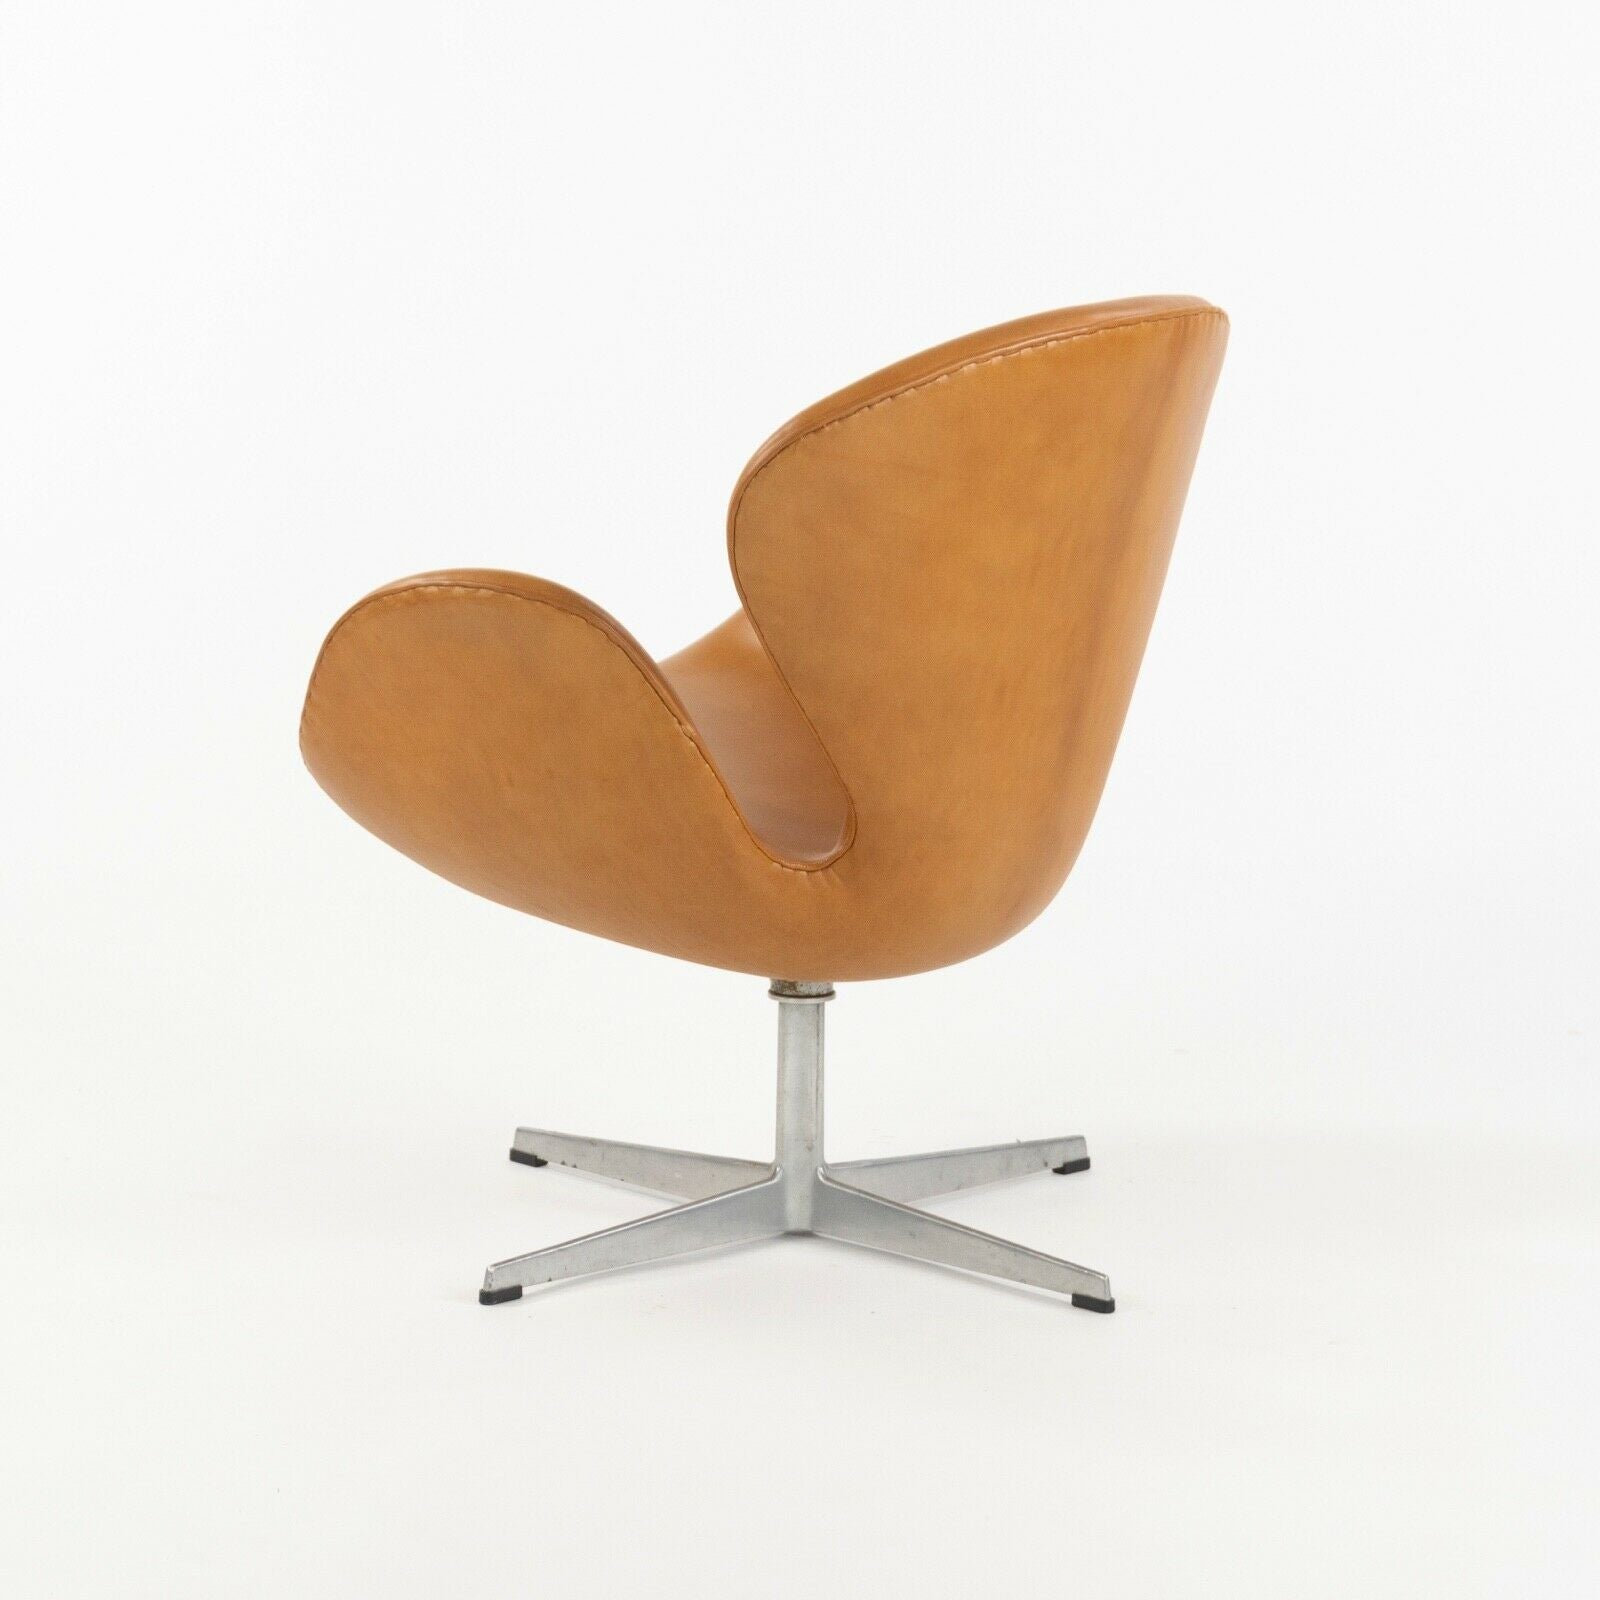 SOLD 1960s Arne Jacobson for Fritz Hansen Swan Chairs in Cognac Leather